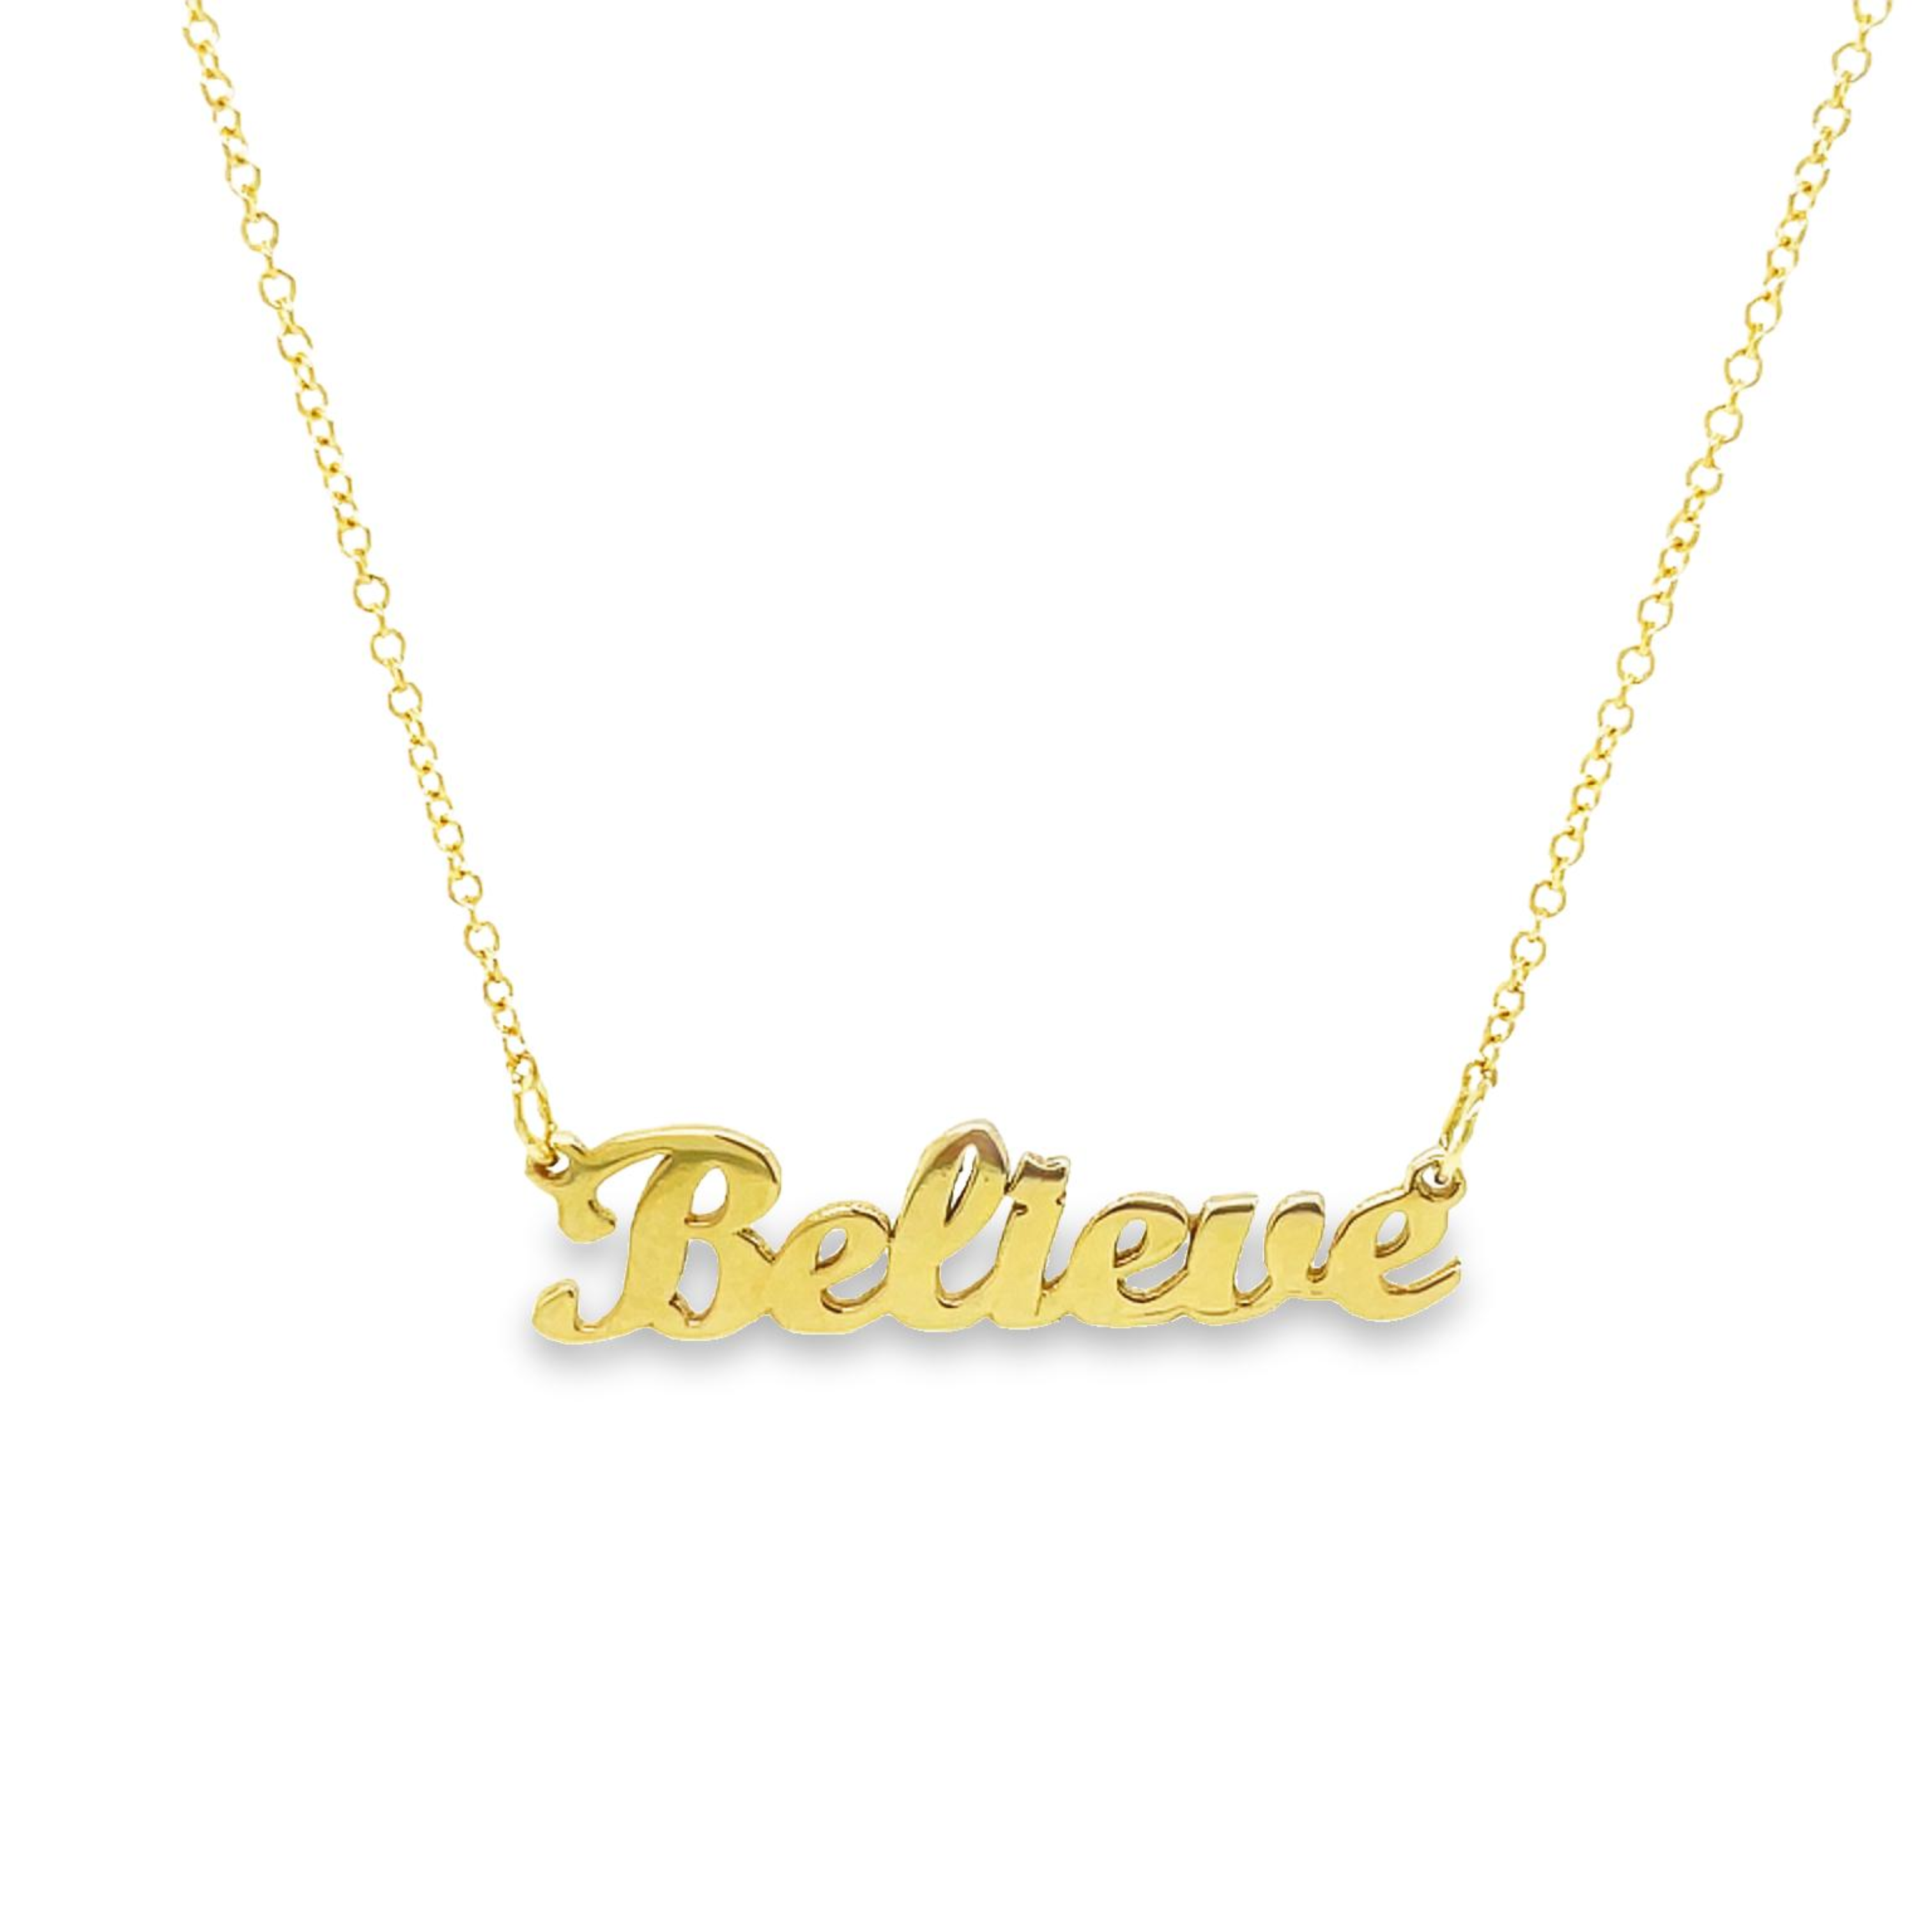 This classic necklace is crafted from 14k yellow gold and features a 1" long nameplate held securely in place by a 16" long chain. The text is expertly inscribed in a beautiful cursive font.